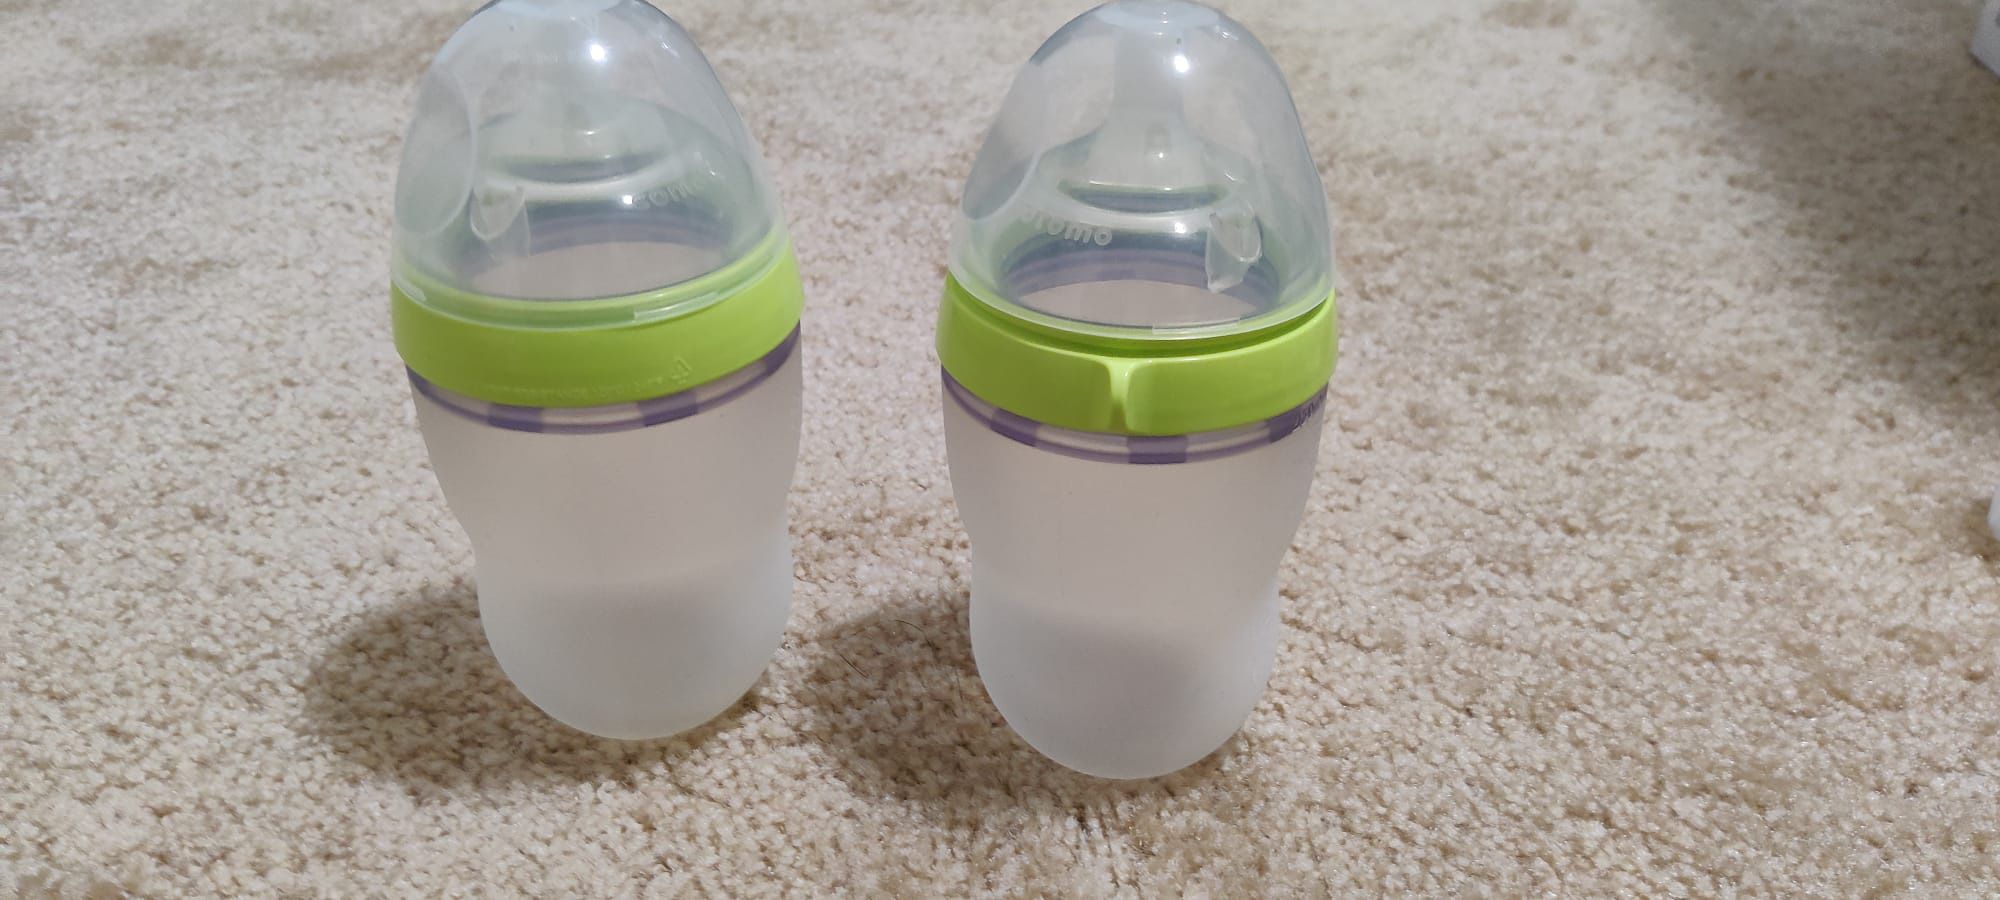 2 Comotomo Bottles For Baby - Rarely Used  